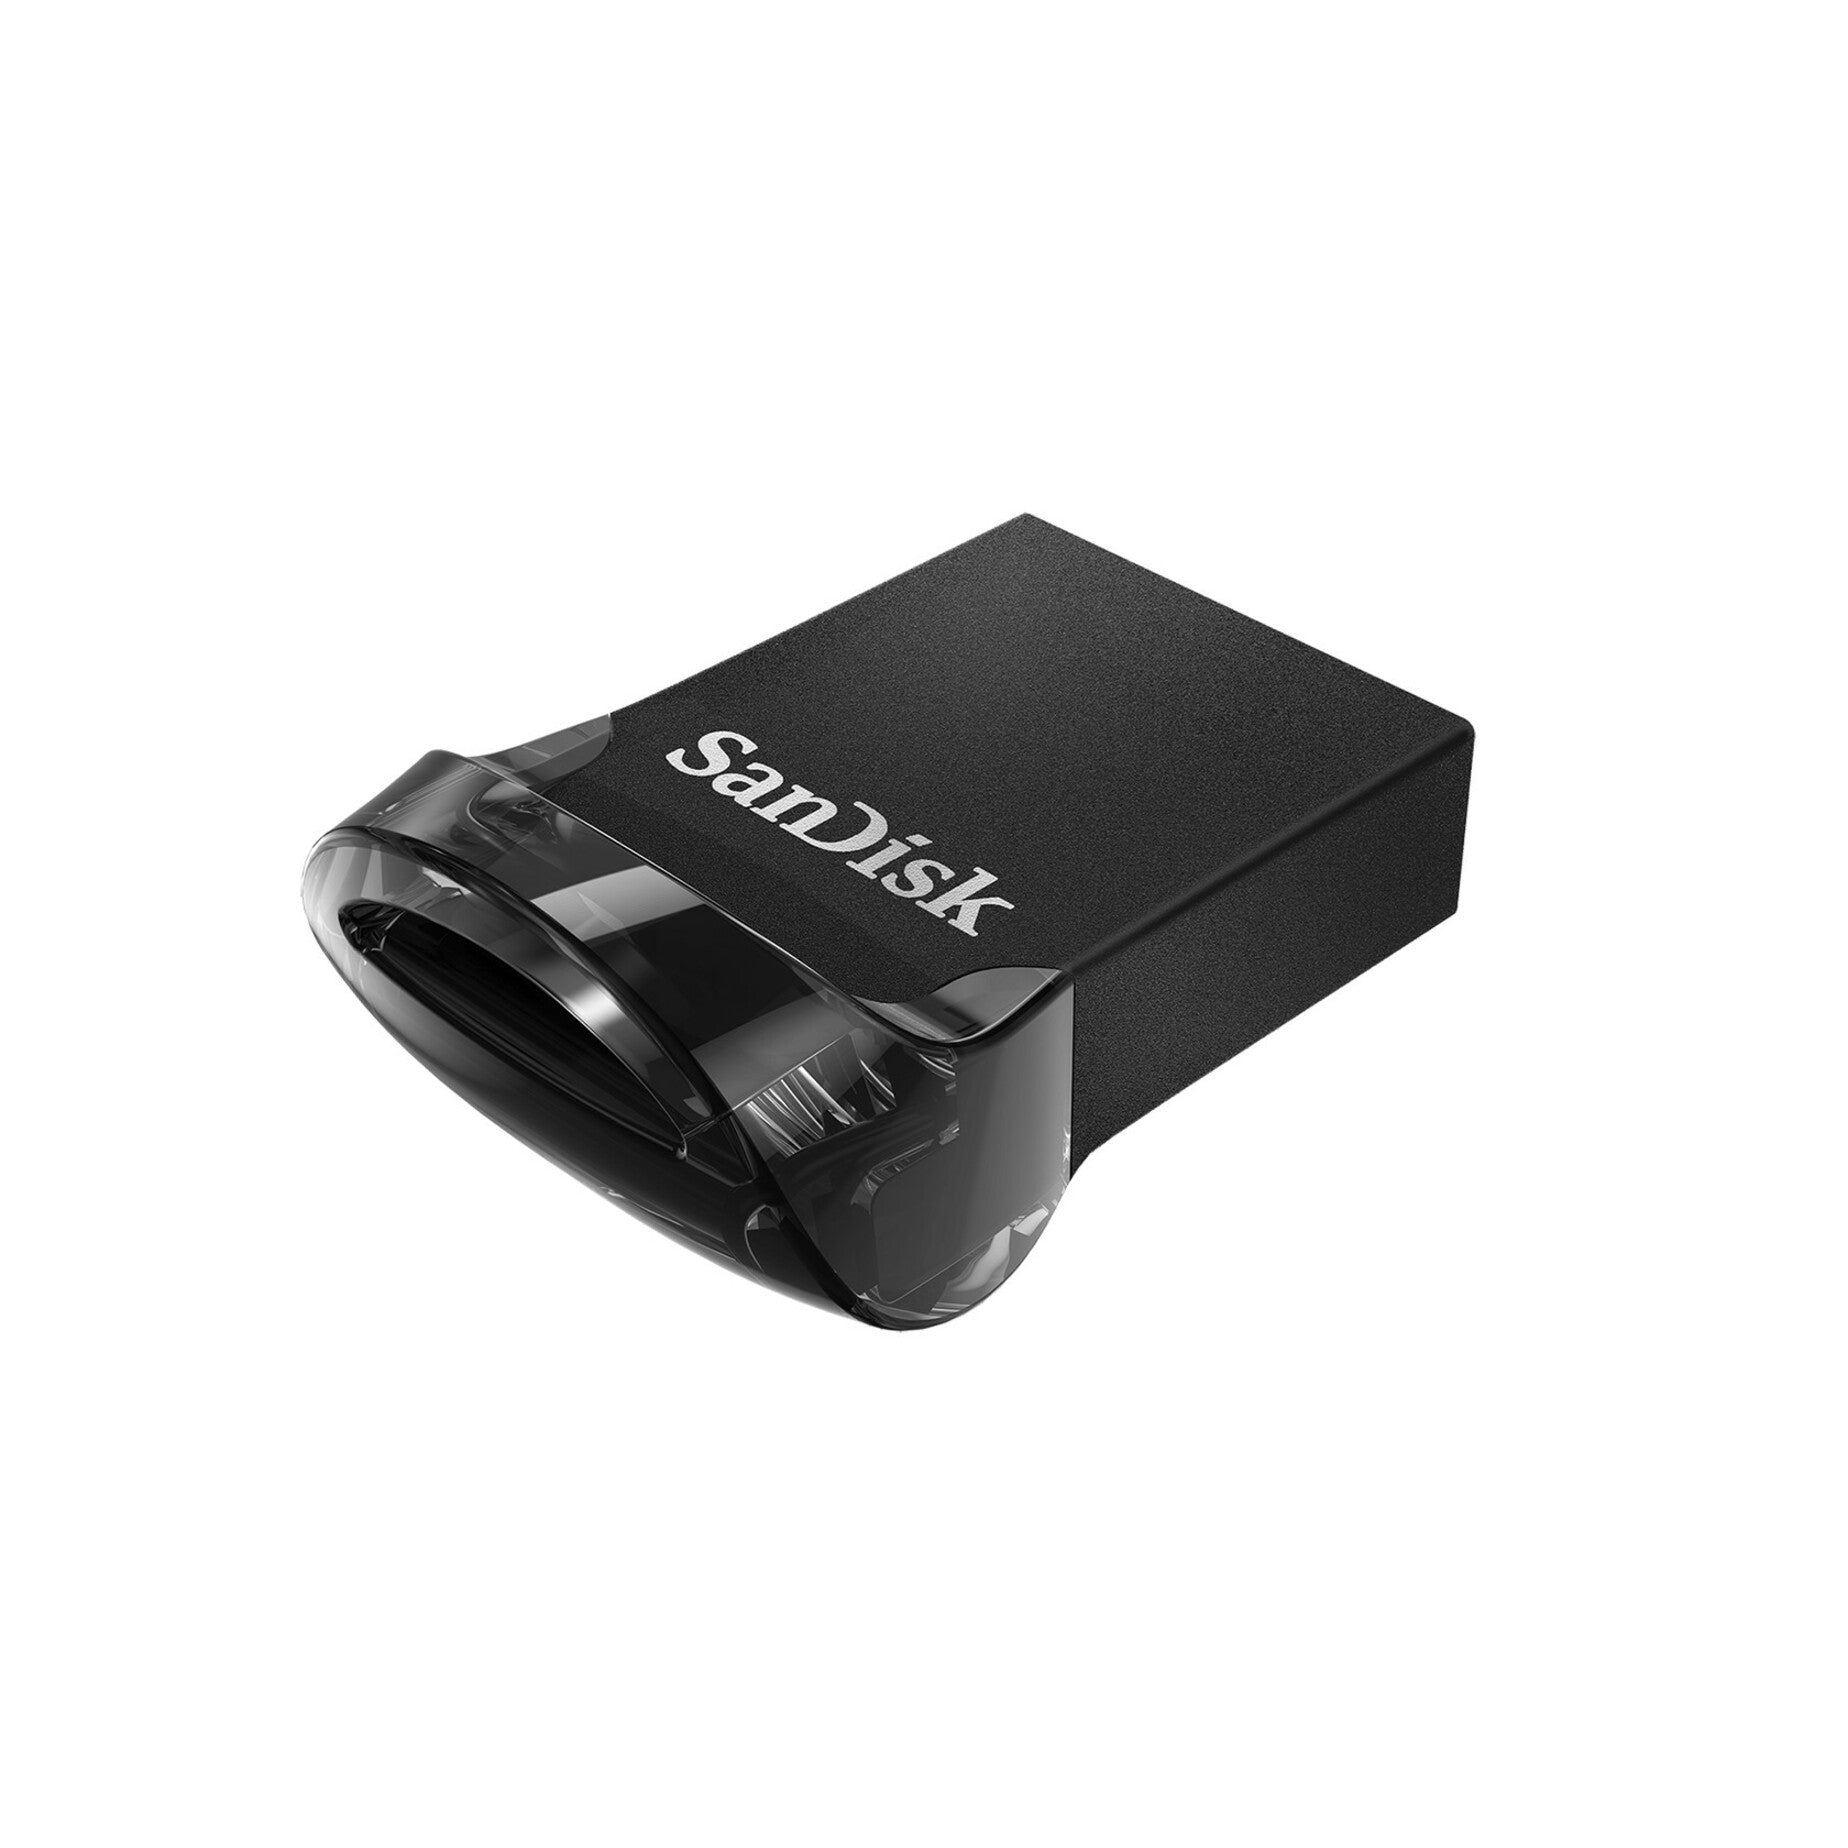 SanDisk SDCZ430-128G-A46 Ultra Fit USB 3.1 Flash Drive 128GB, High-Speed Data Transfer and Compact Design